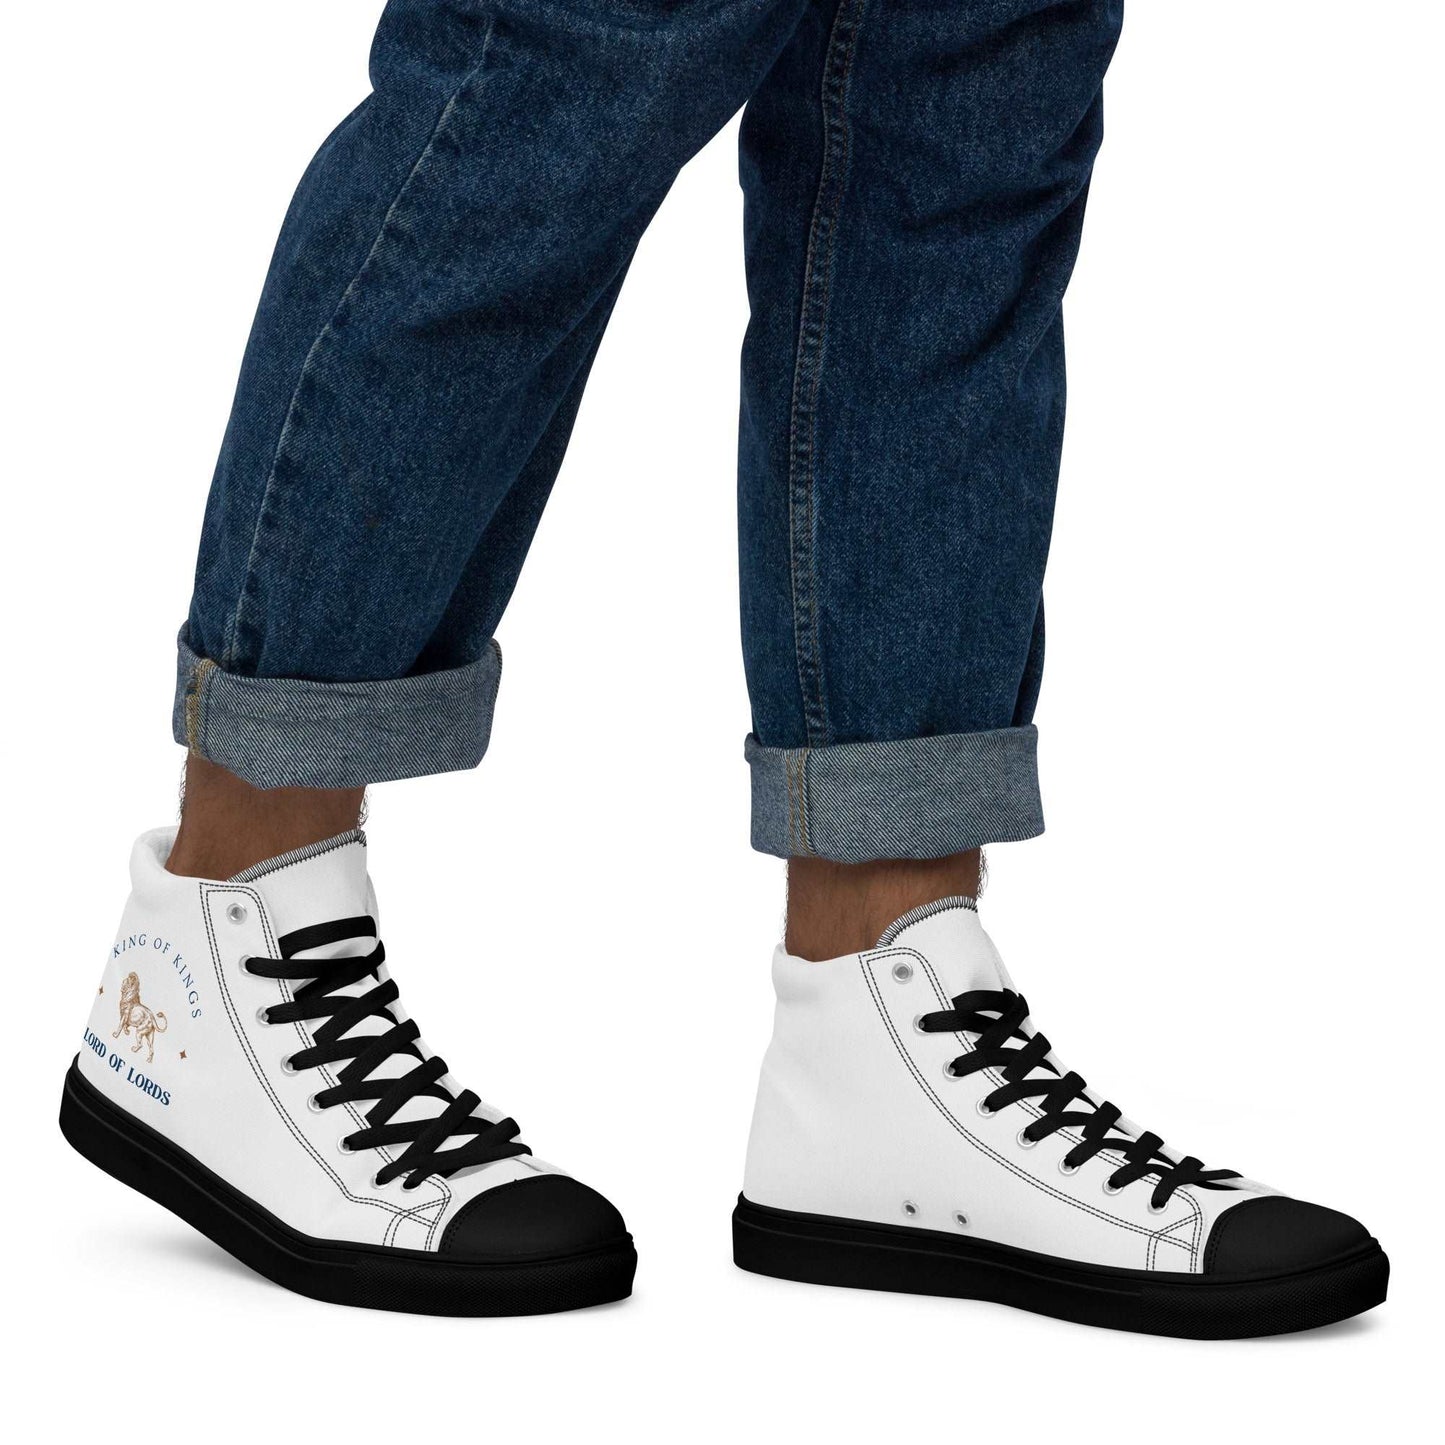 Men’s high top canvas shoes - KING OF KINGS